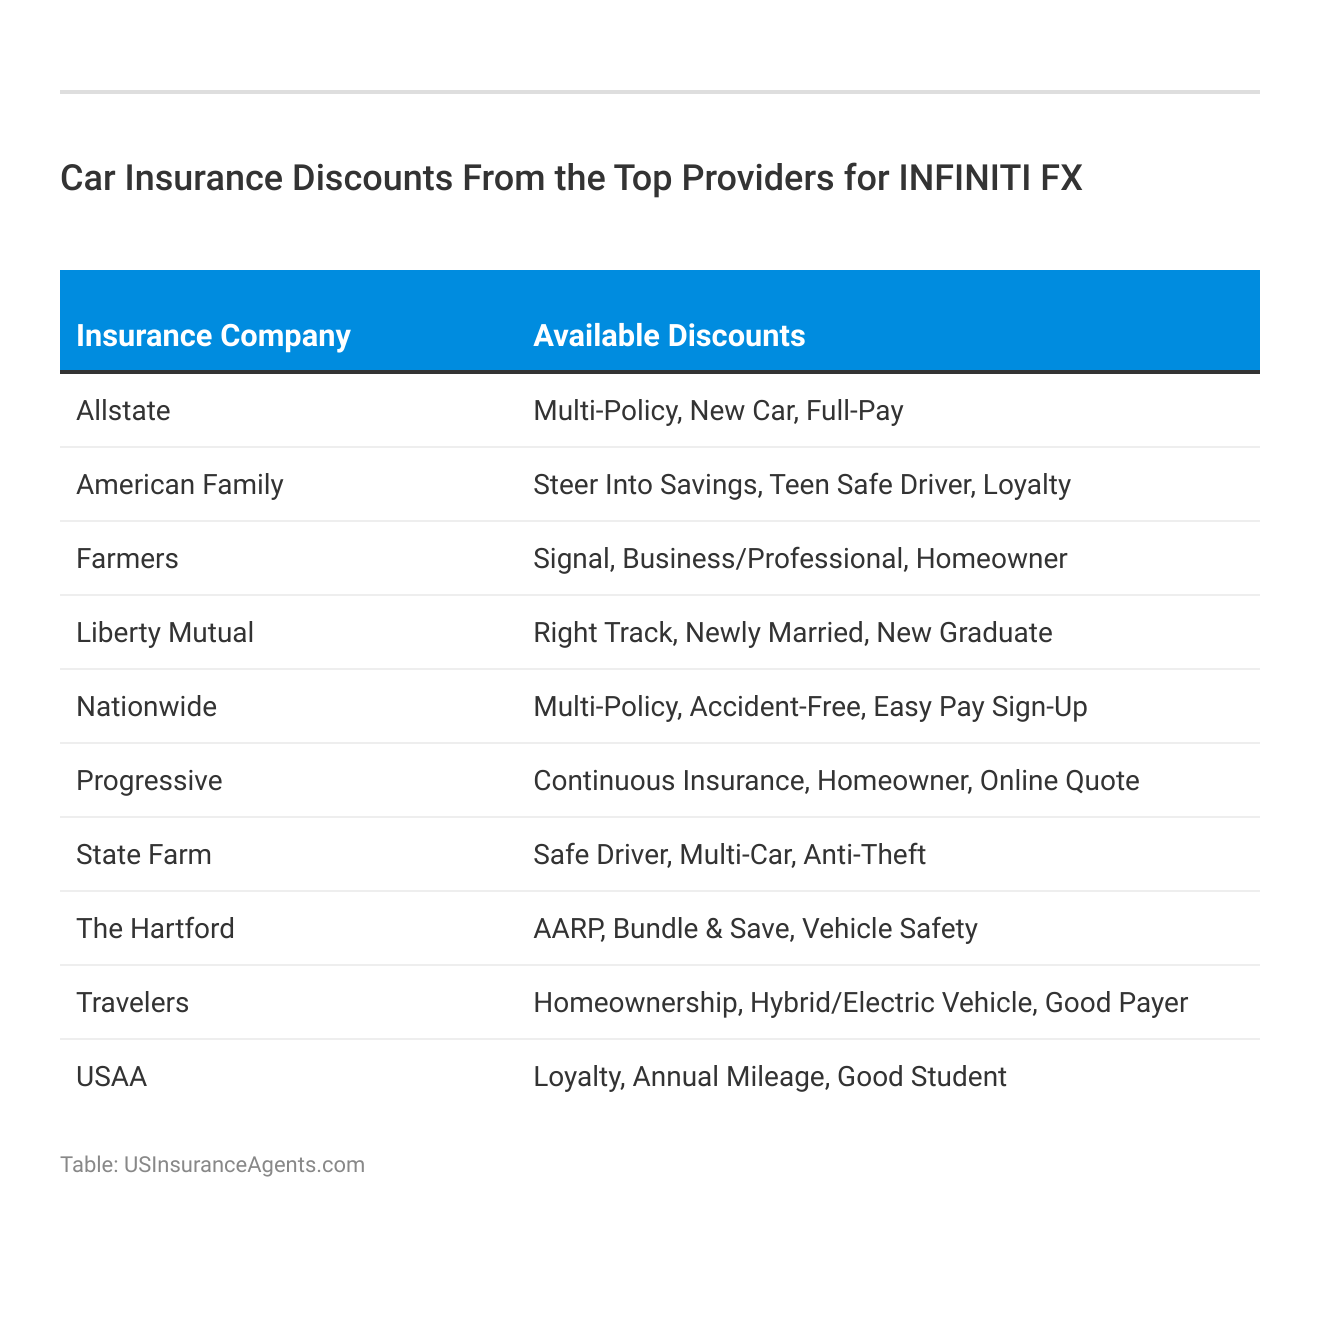 <h3>Car Insurance Discounts From the Top Providers for INFINITI FX</h3>